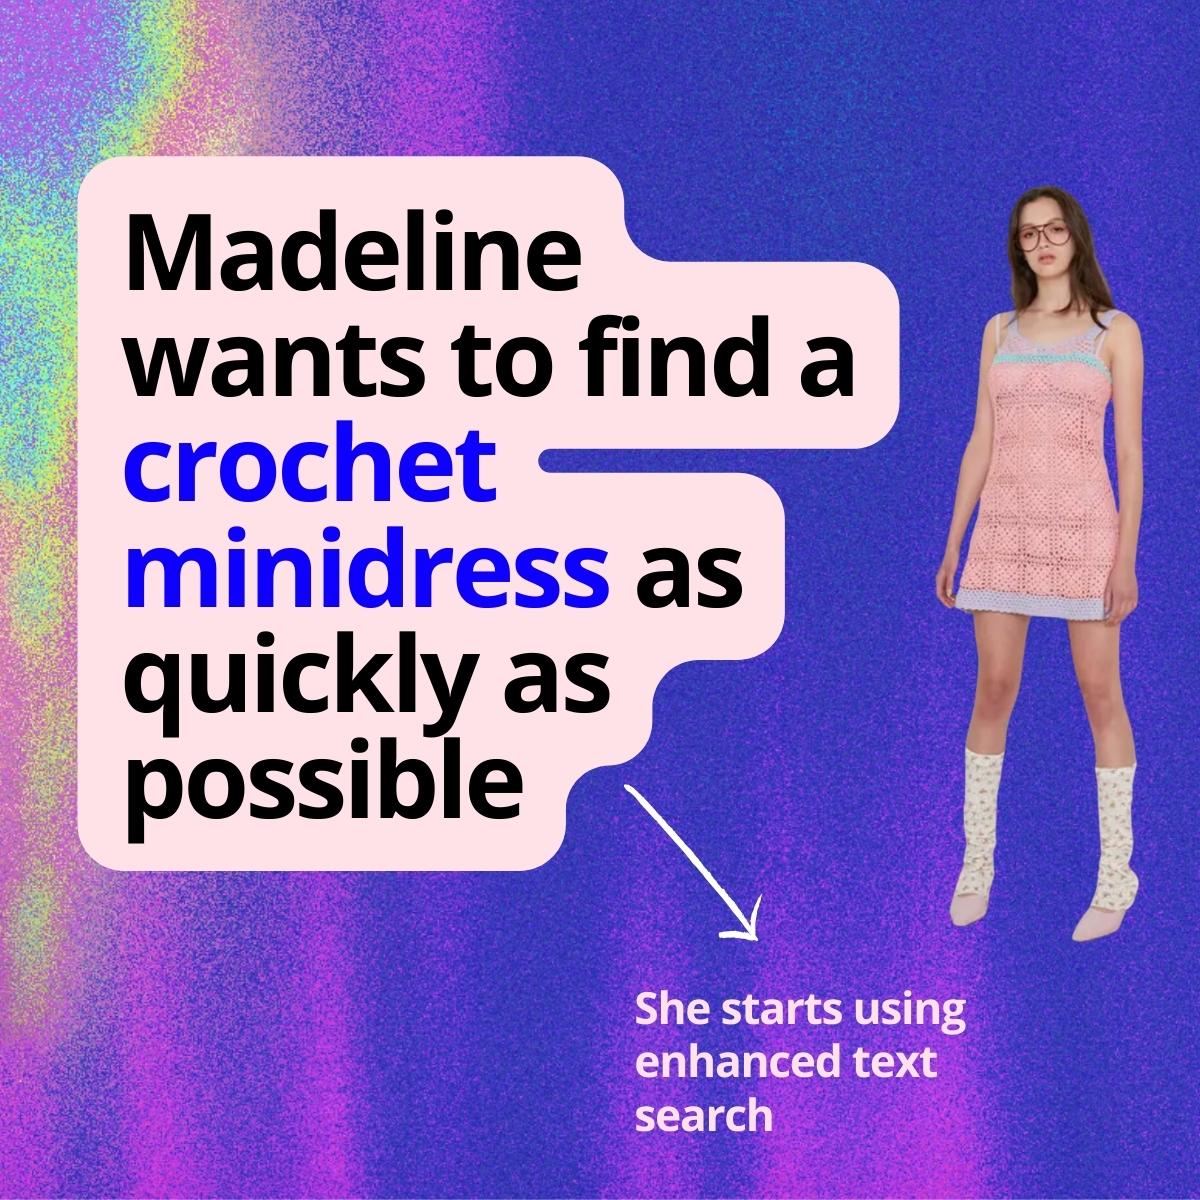 User journey of Madeline with an image of a crochet dress